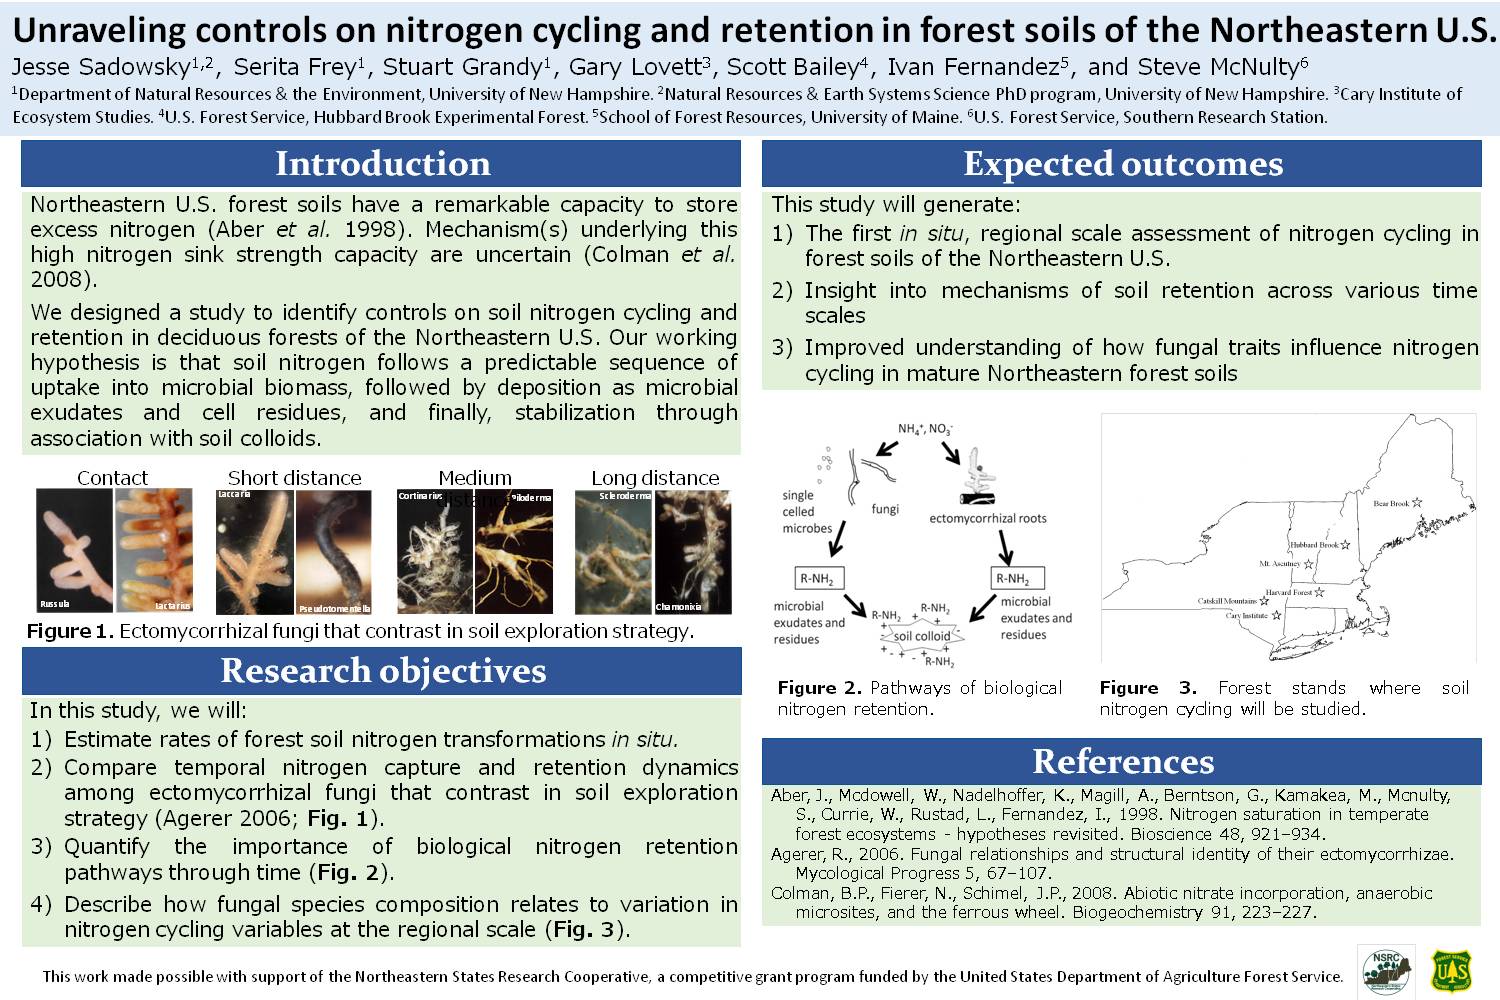 Unraveling Controls On Nitrogen Cycling And Retention In Forest Soils Of The Northeastern U.S. by sadowsk